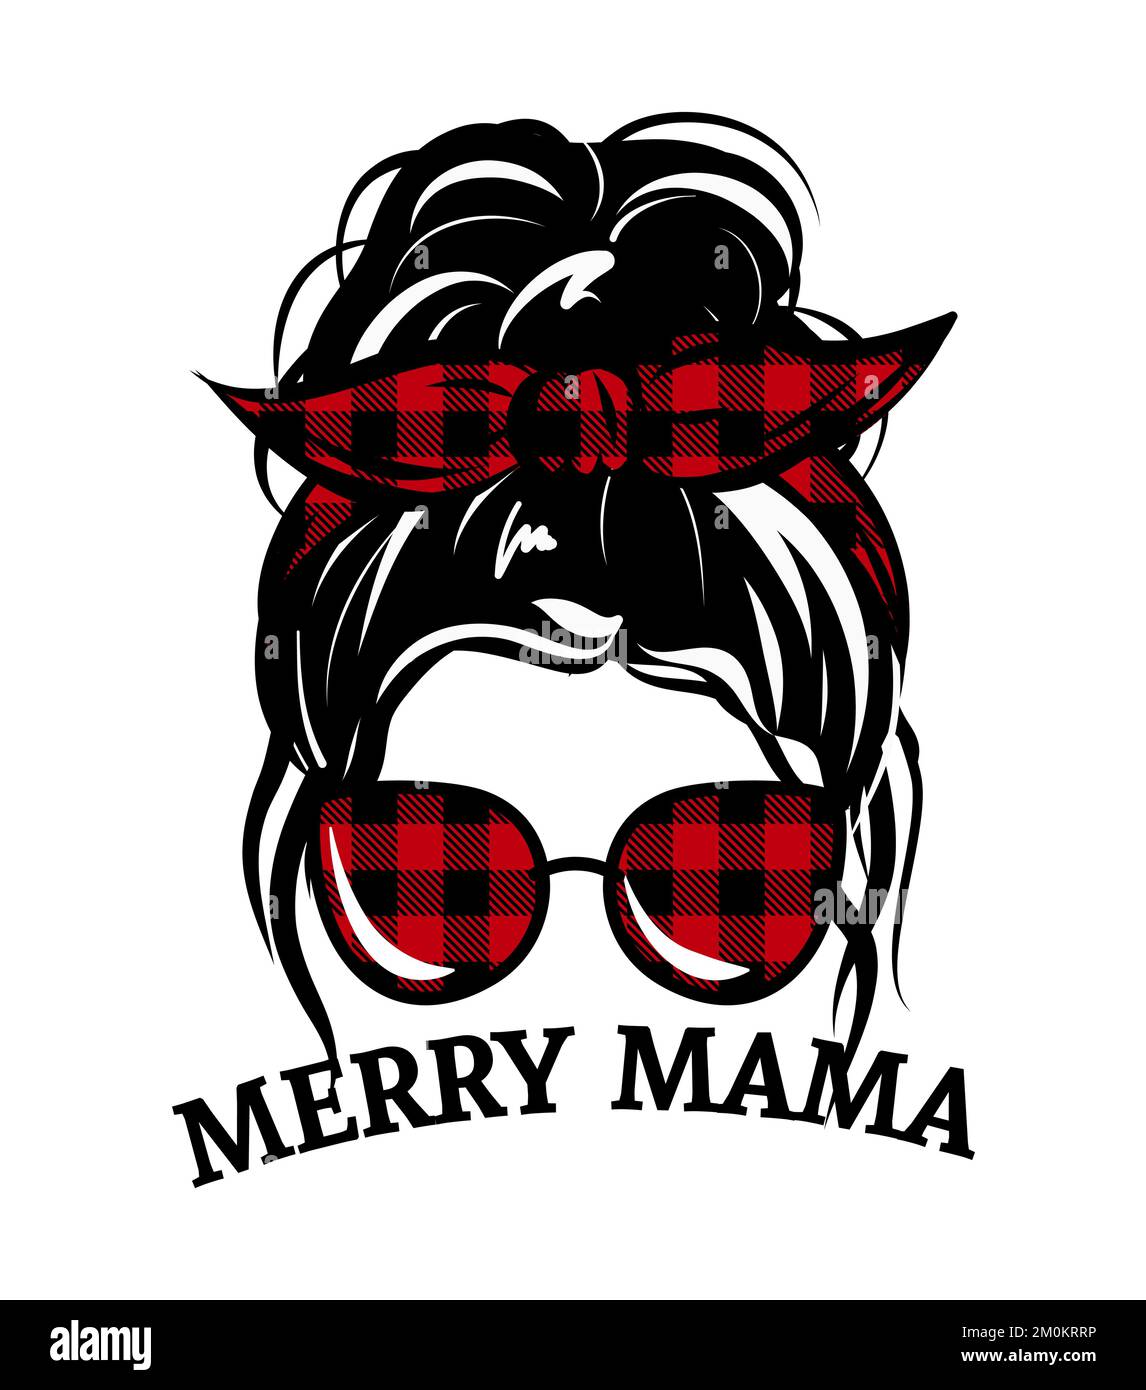 Beautiful woman with beautiful lashes and red bandana. Lady Mom with messy bun, getting stuff done. Fashion illustration for t shirt. Christmas design Stock Vector